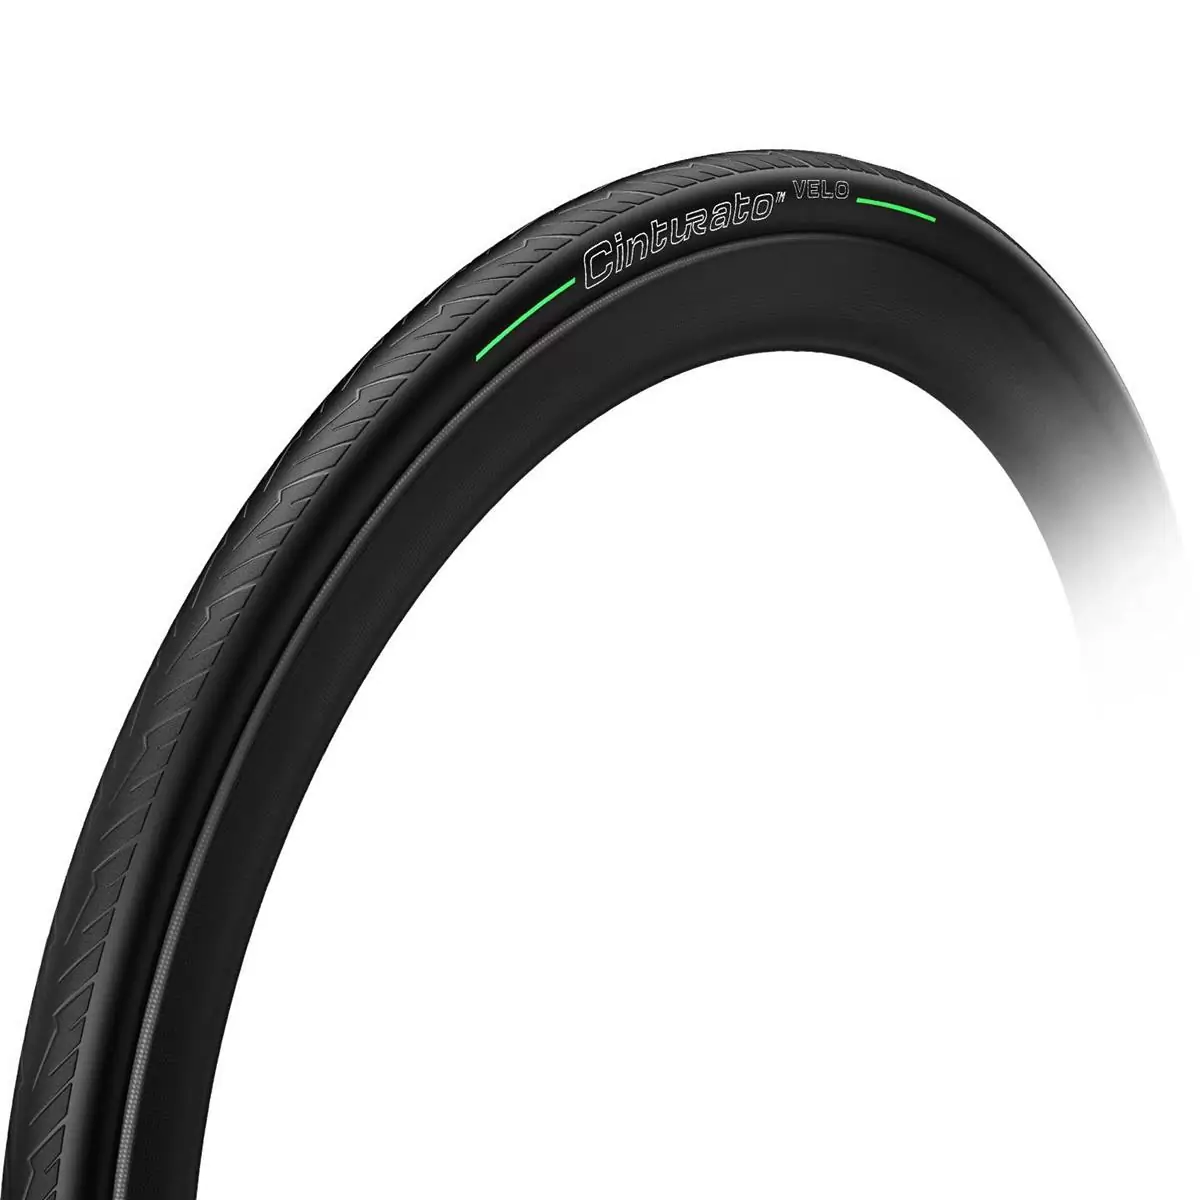 Cubierta Cinturato Velo Tlr 700x26c Tubeless Ready Negro - image